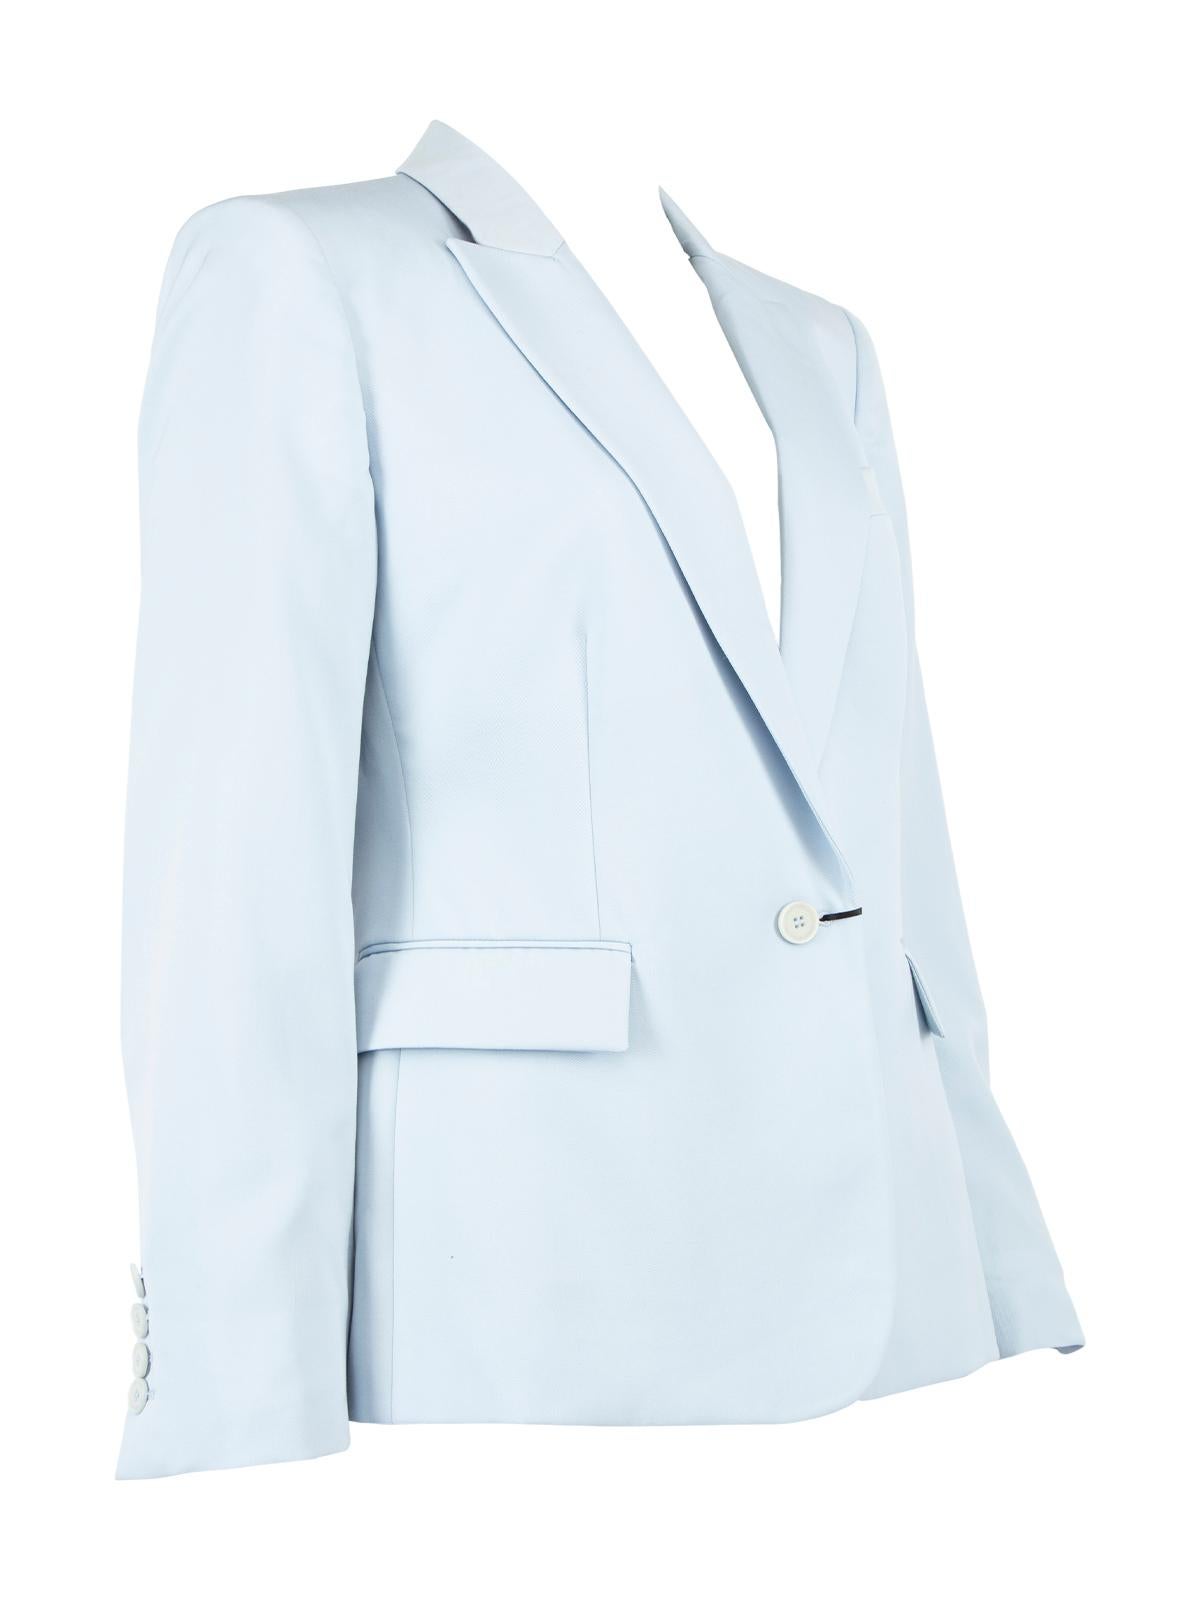 CONDITION is Never worn, with tags. No visible wear to blazer is evident on this new Stella McCartney designer resale item. Details Blue Wool Button fastening Long sleeves V neck Made in Hungary Composition 100% wool Care instructions: Professional